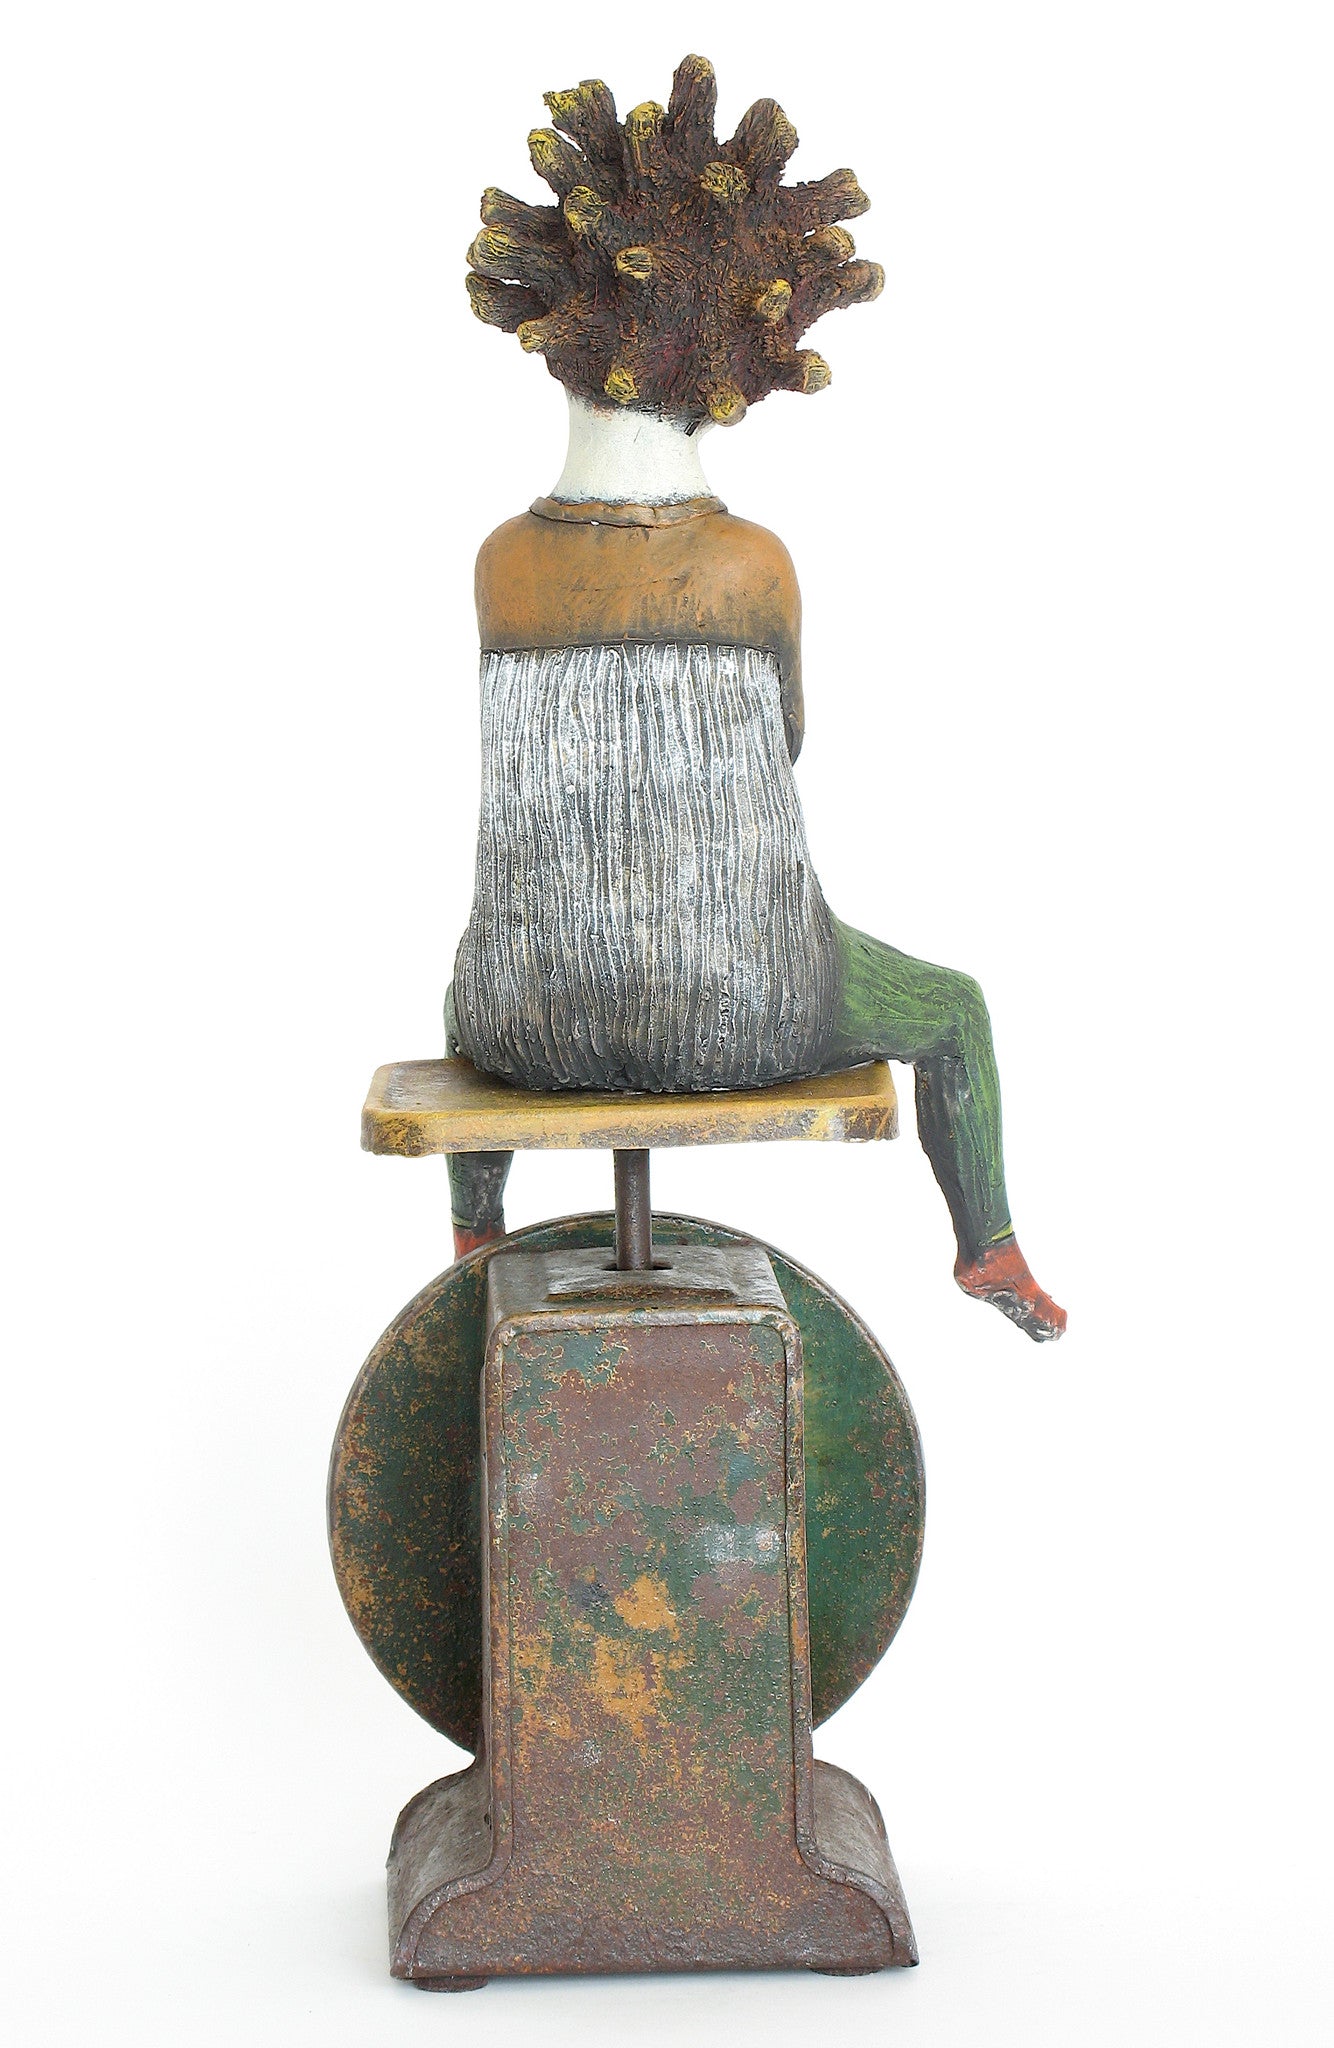 SOLD  "Weighing the Consequences"  original ceramic sculpture with antique scale by Jacquline Hurlbert